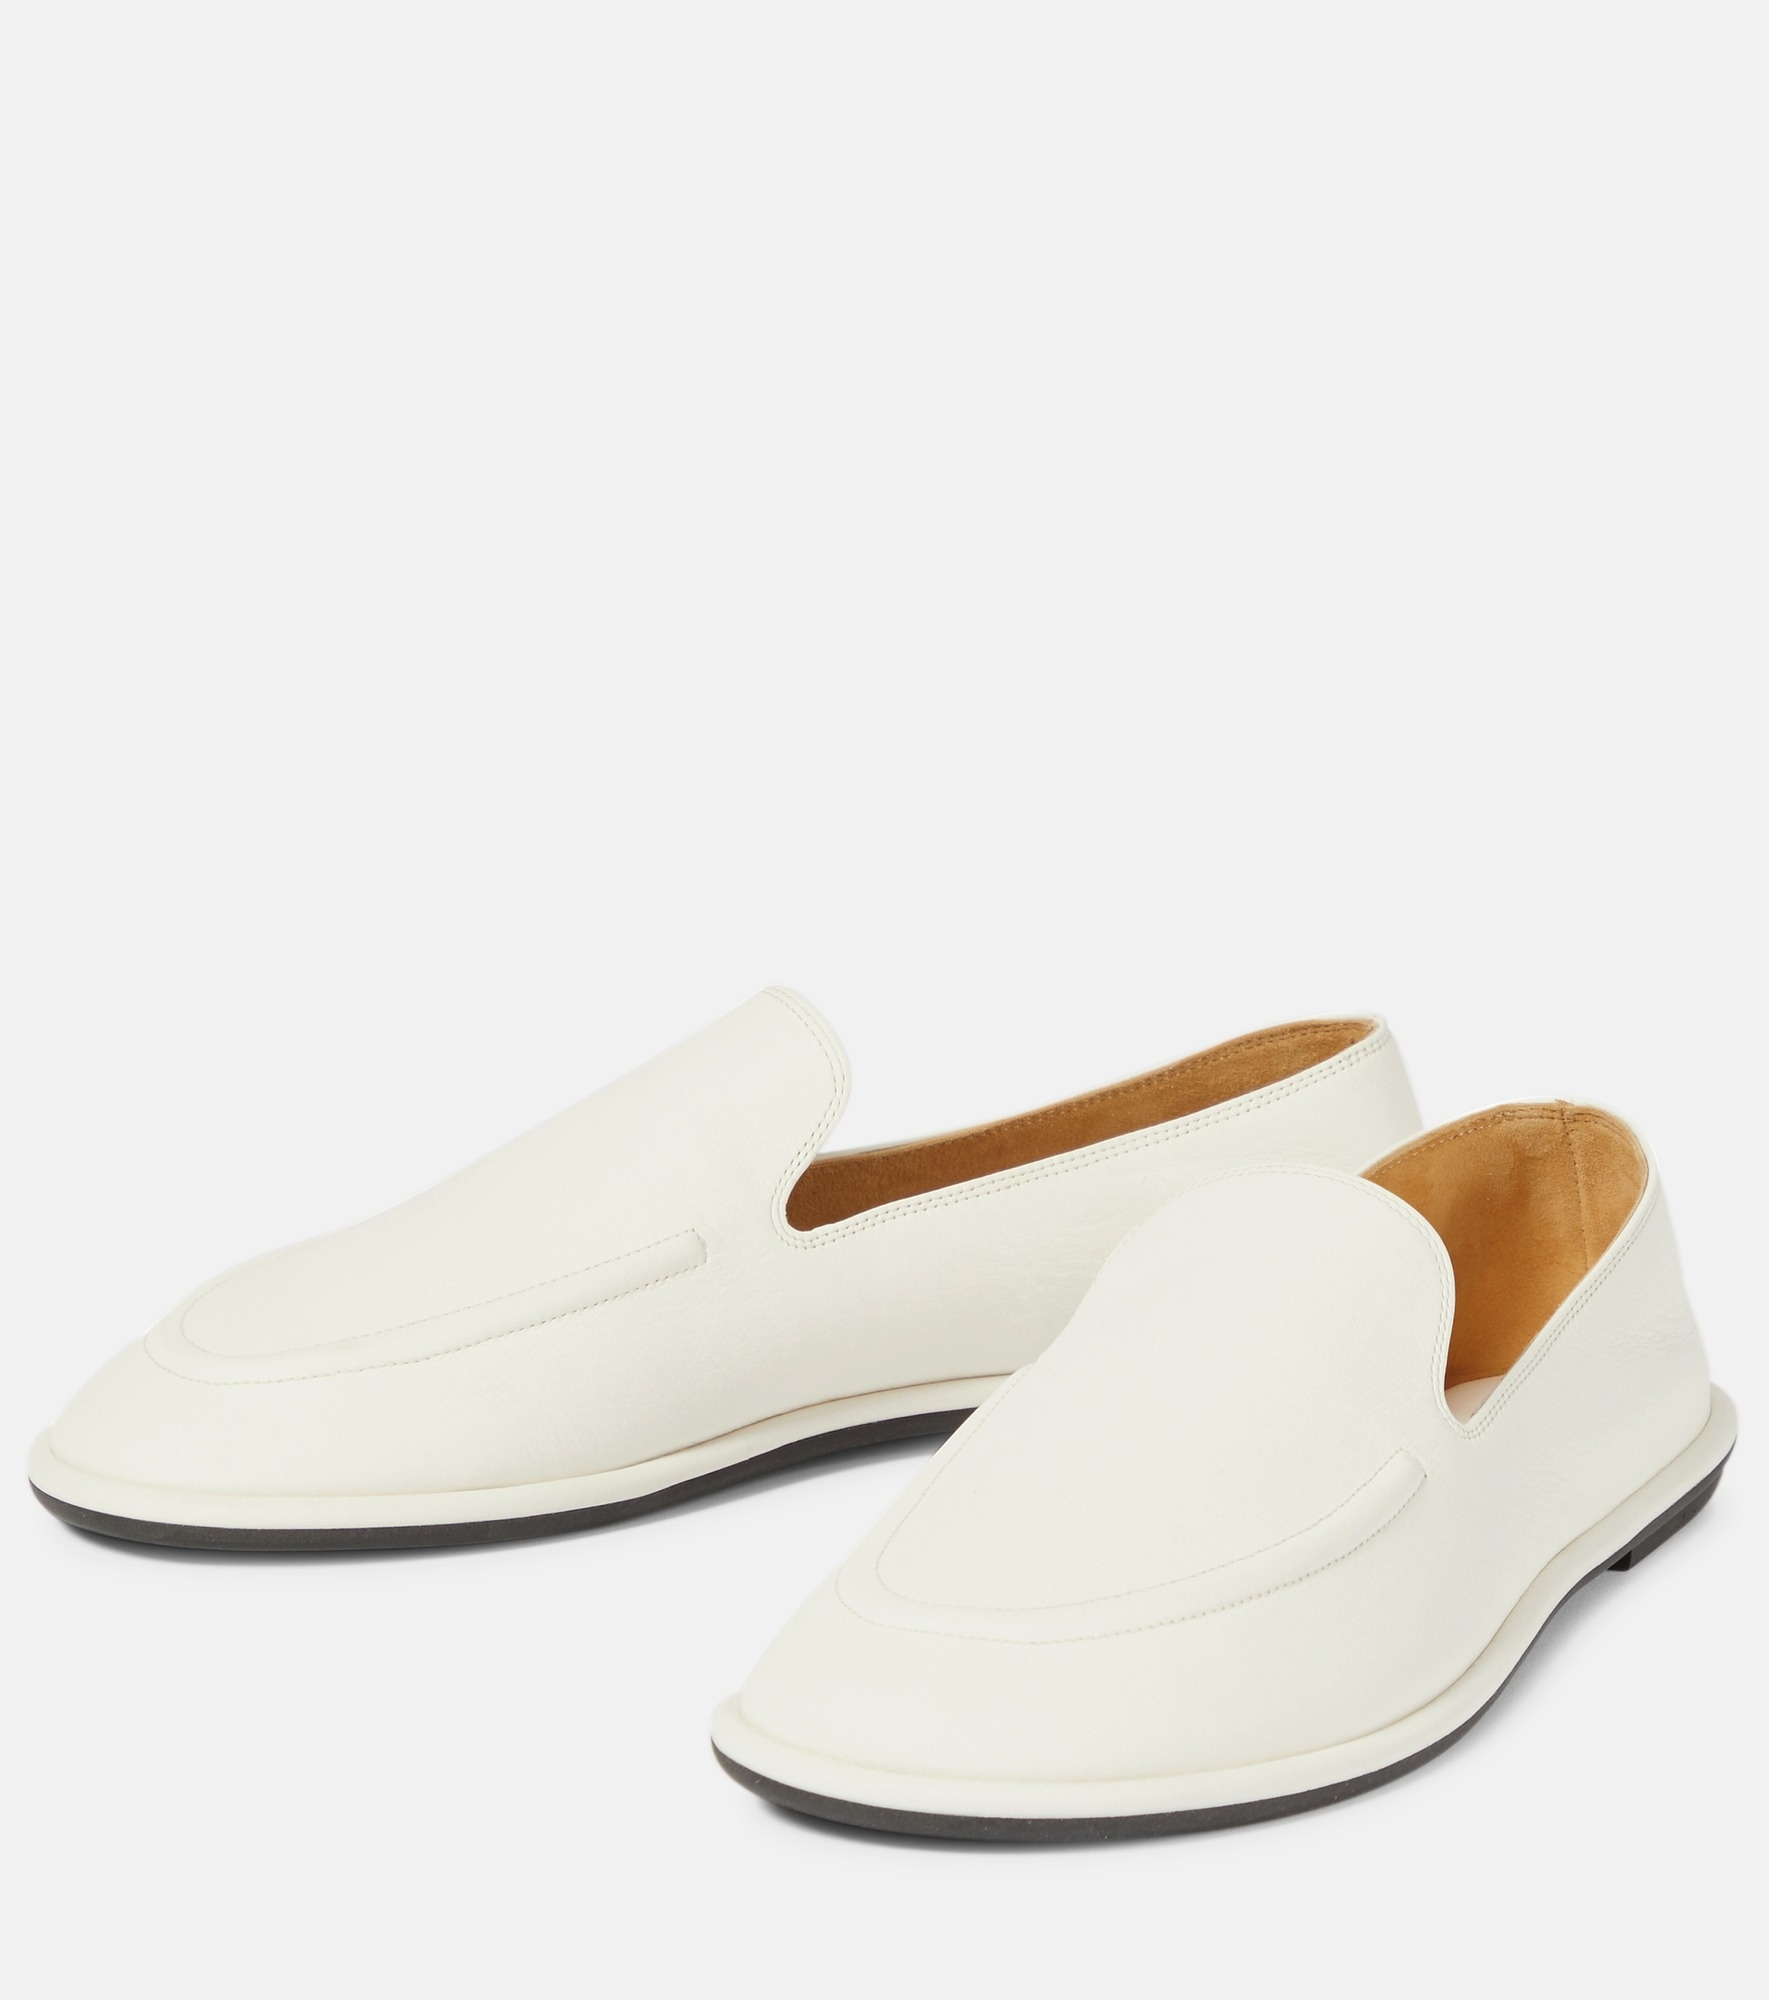 Canal leather loafers - 5